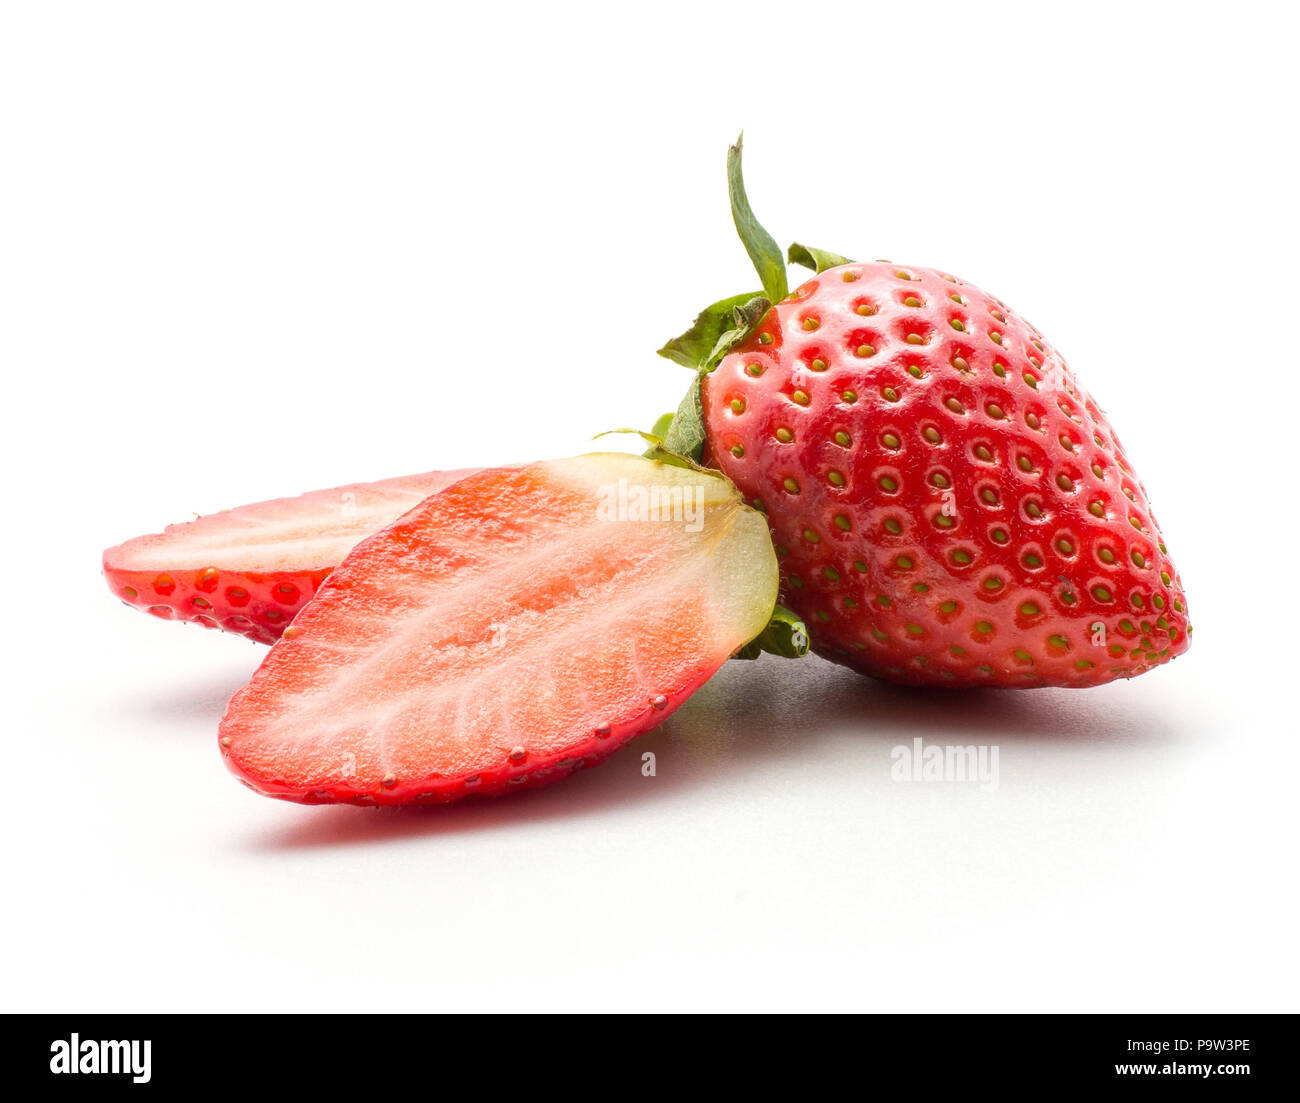 Ripe garden strawberry and two fresh cut halves isolated on white background Stock Photo